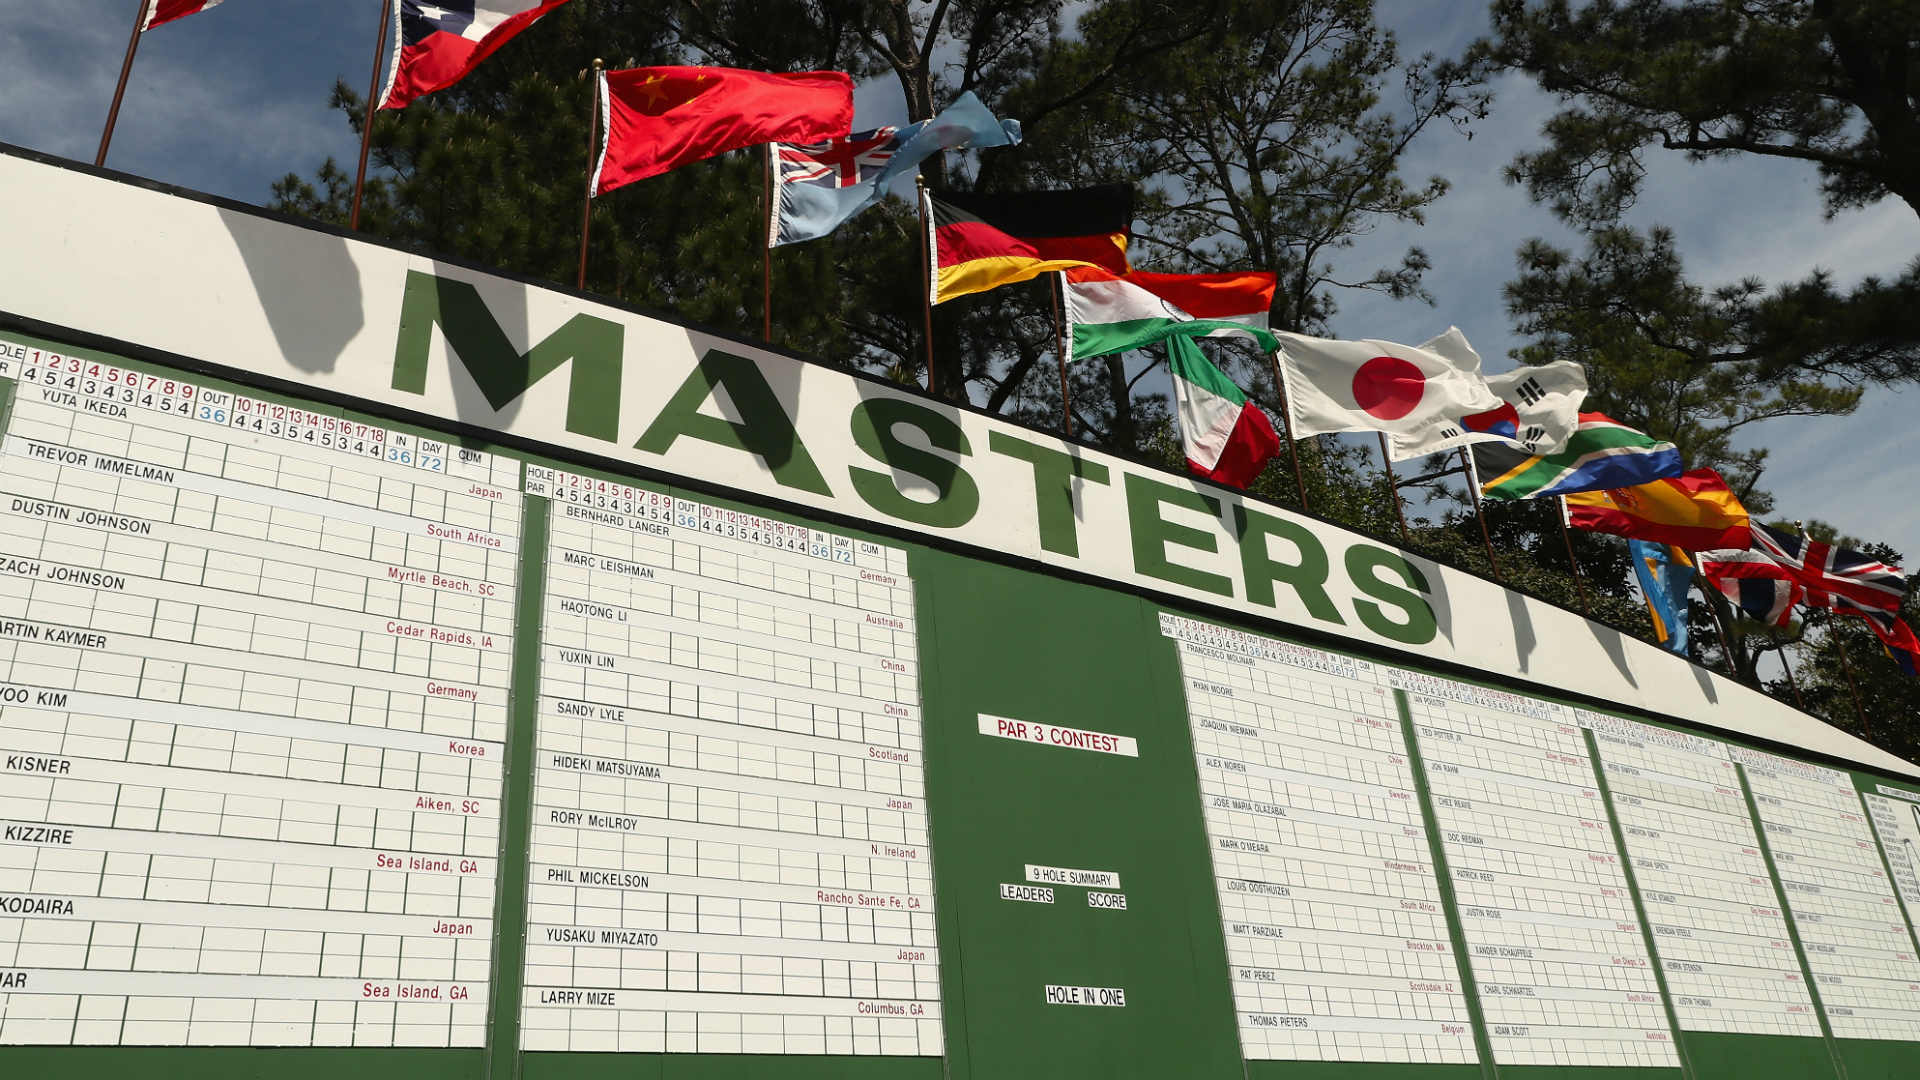 The Masters In October?  Check Those Augusta Hotels